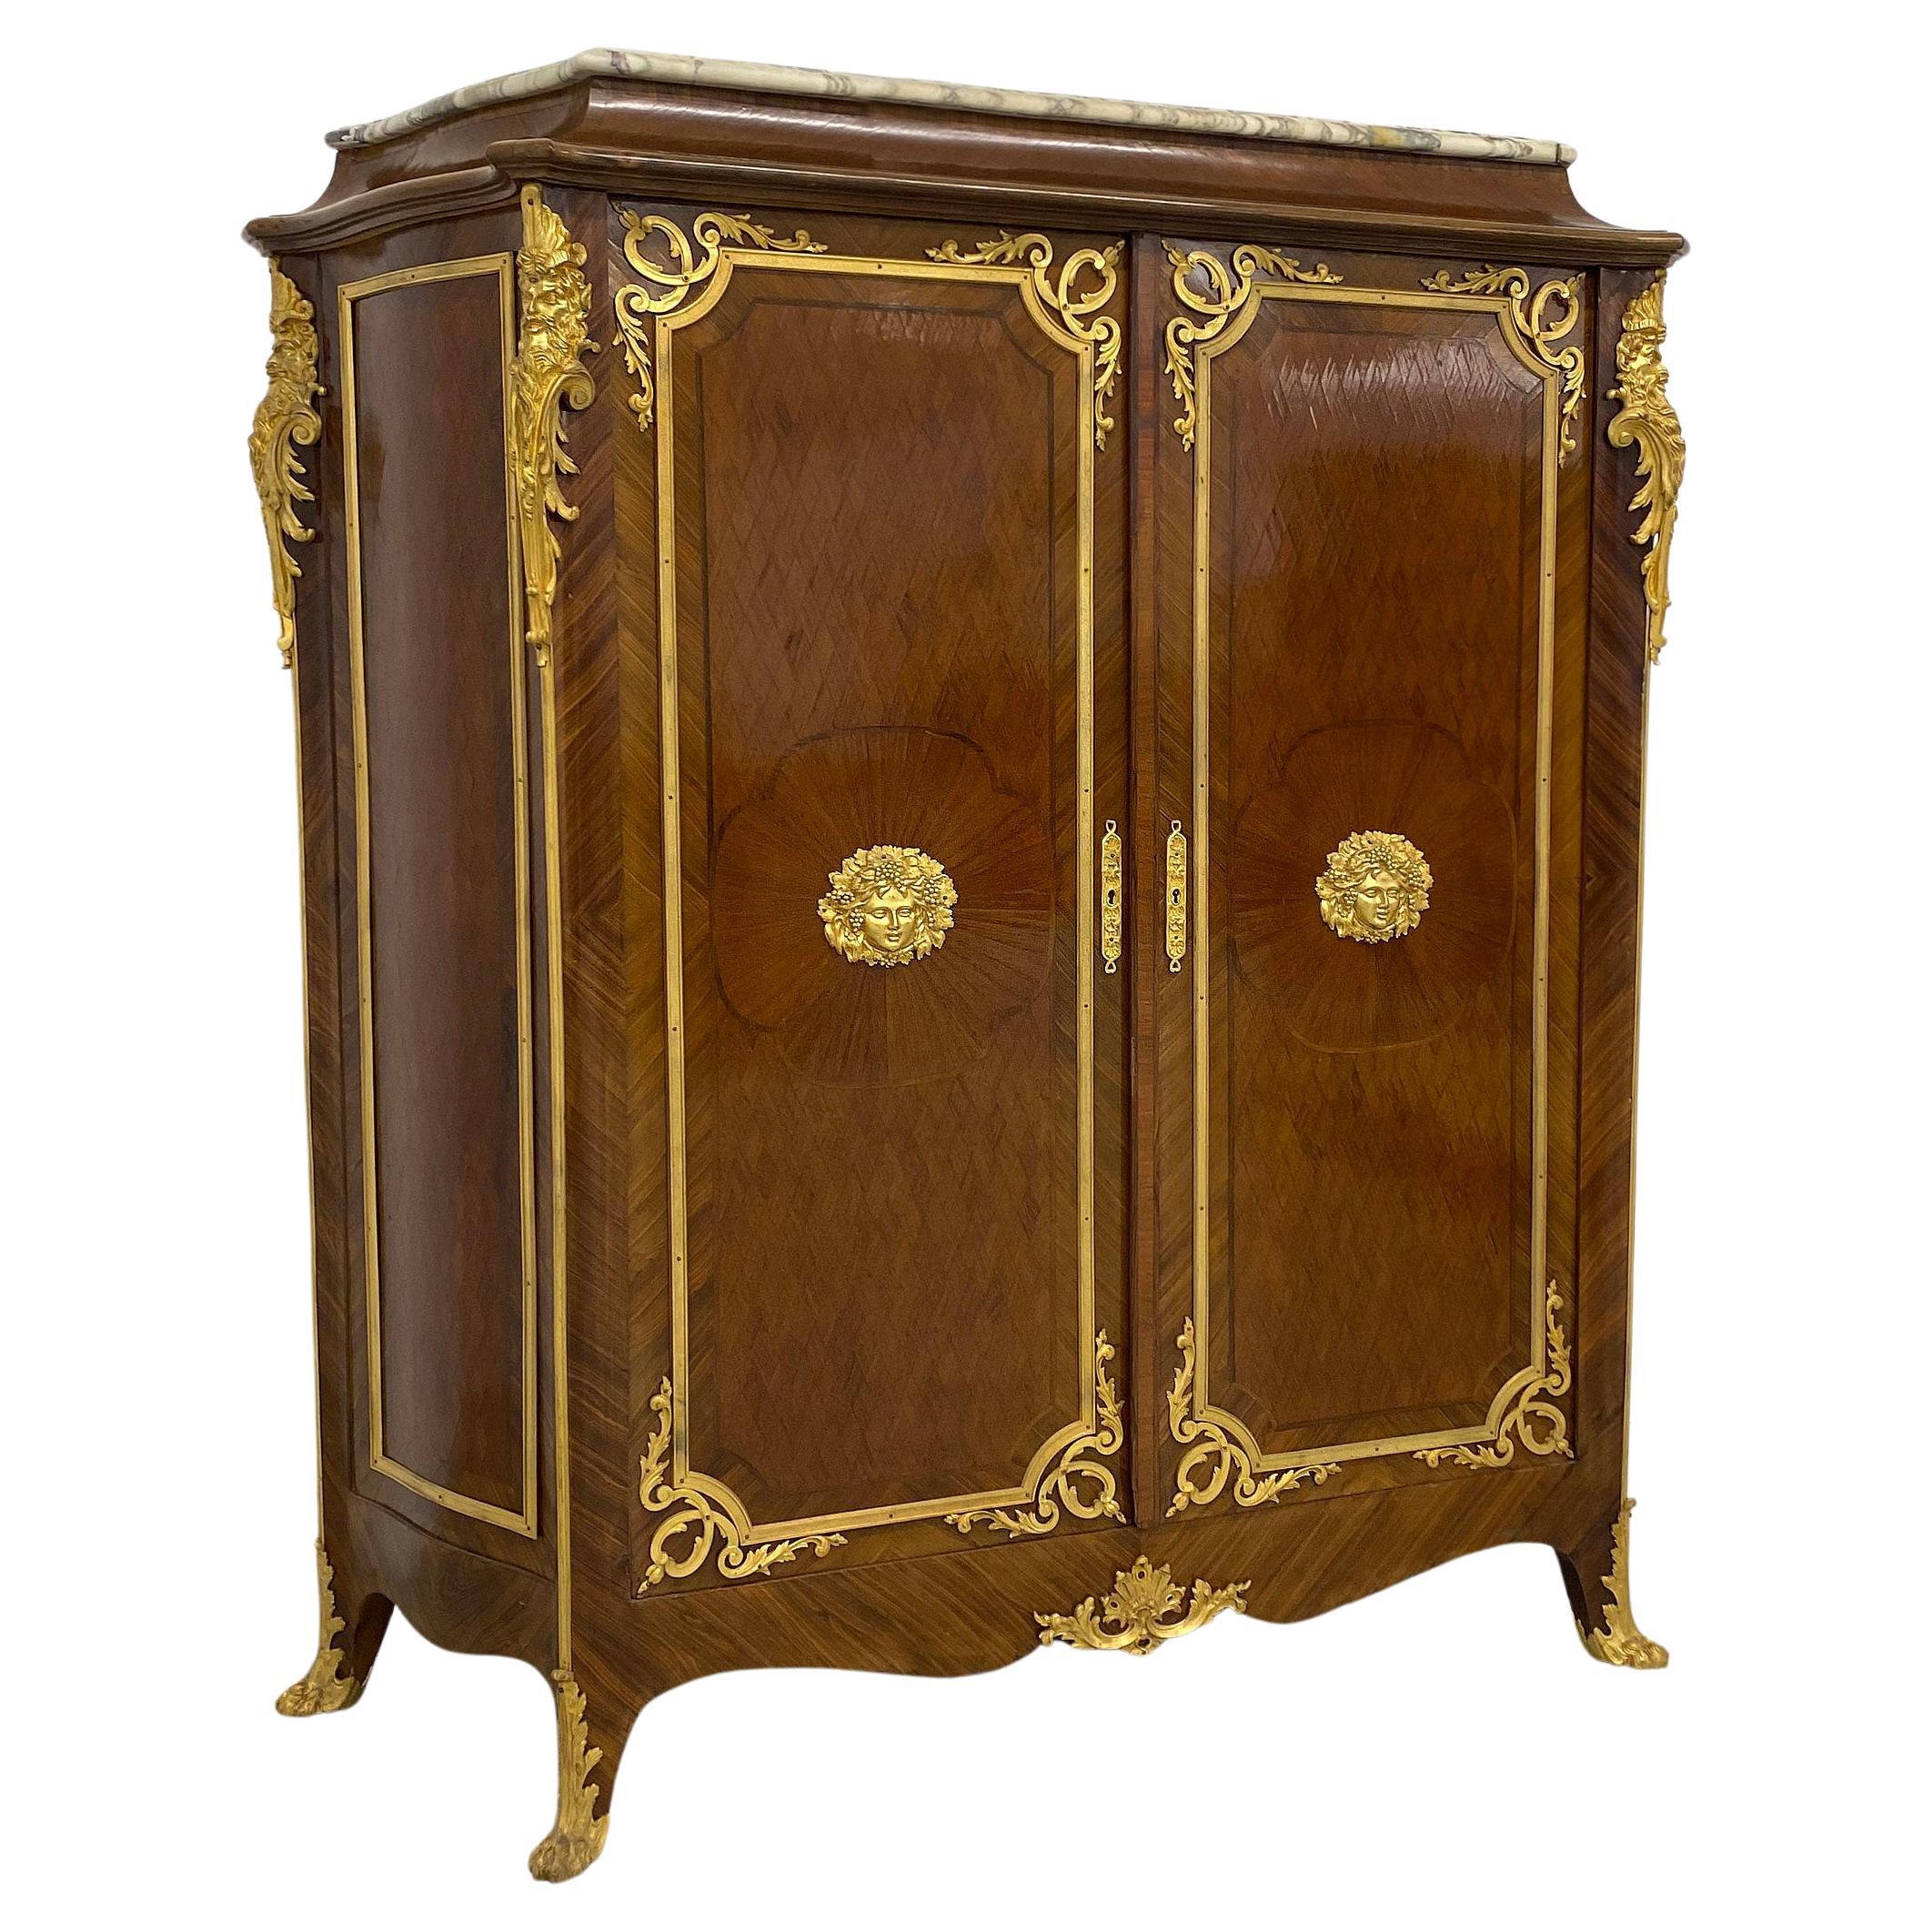 Nice Late 19th Century Gilt Bronze Mounted Transitional Style Parquetry Cabinet For Sale